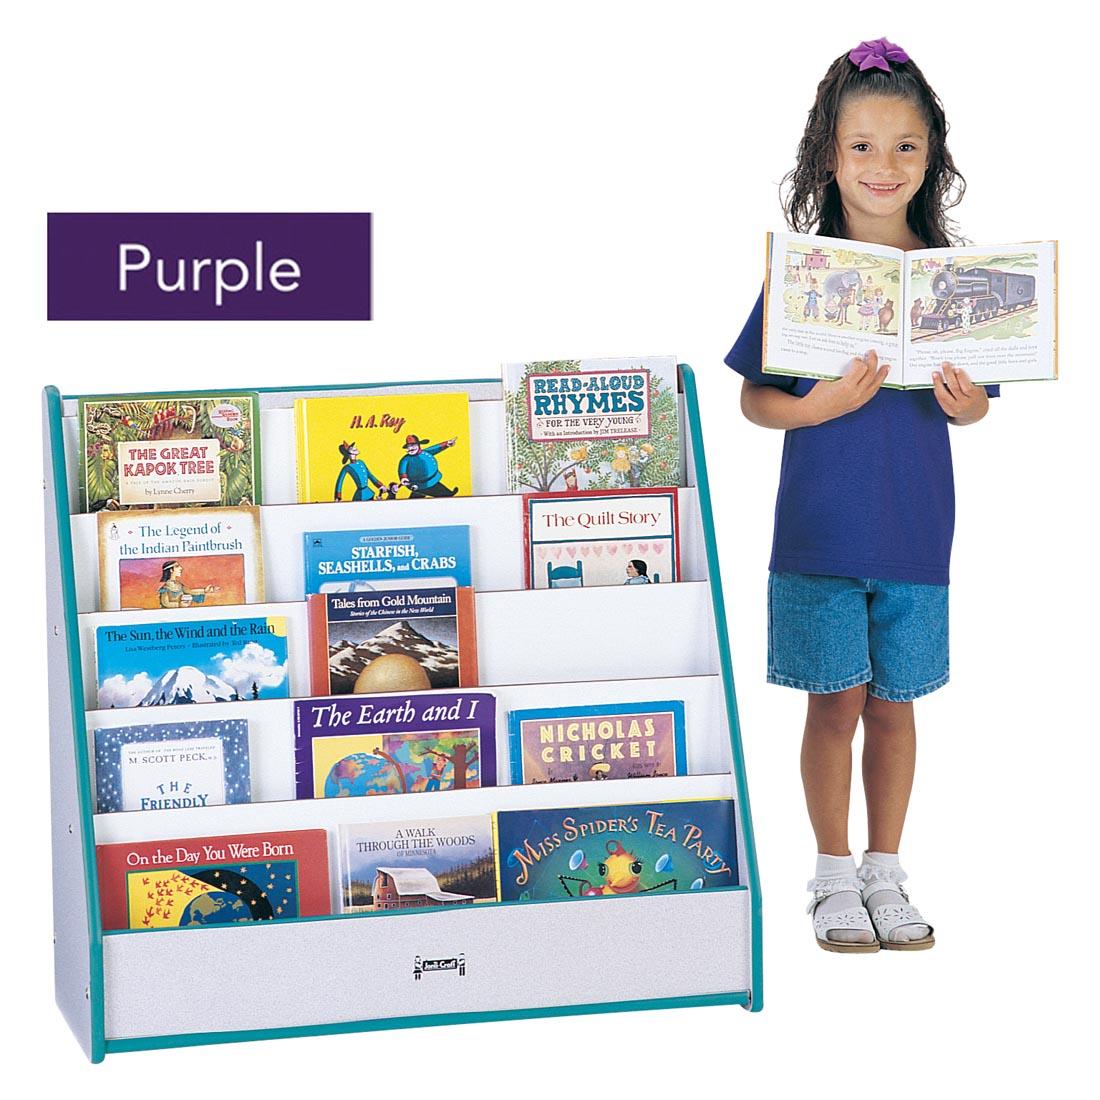 Child standing beside the Colored Edged Pick-a-Book Flushback Book Stand with a text overlay labeled Purple